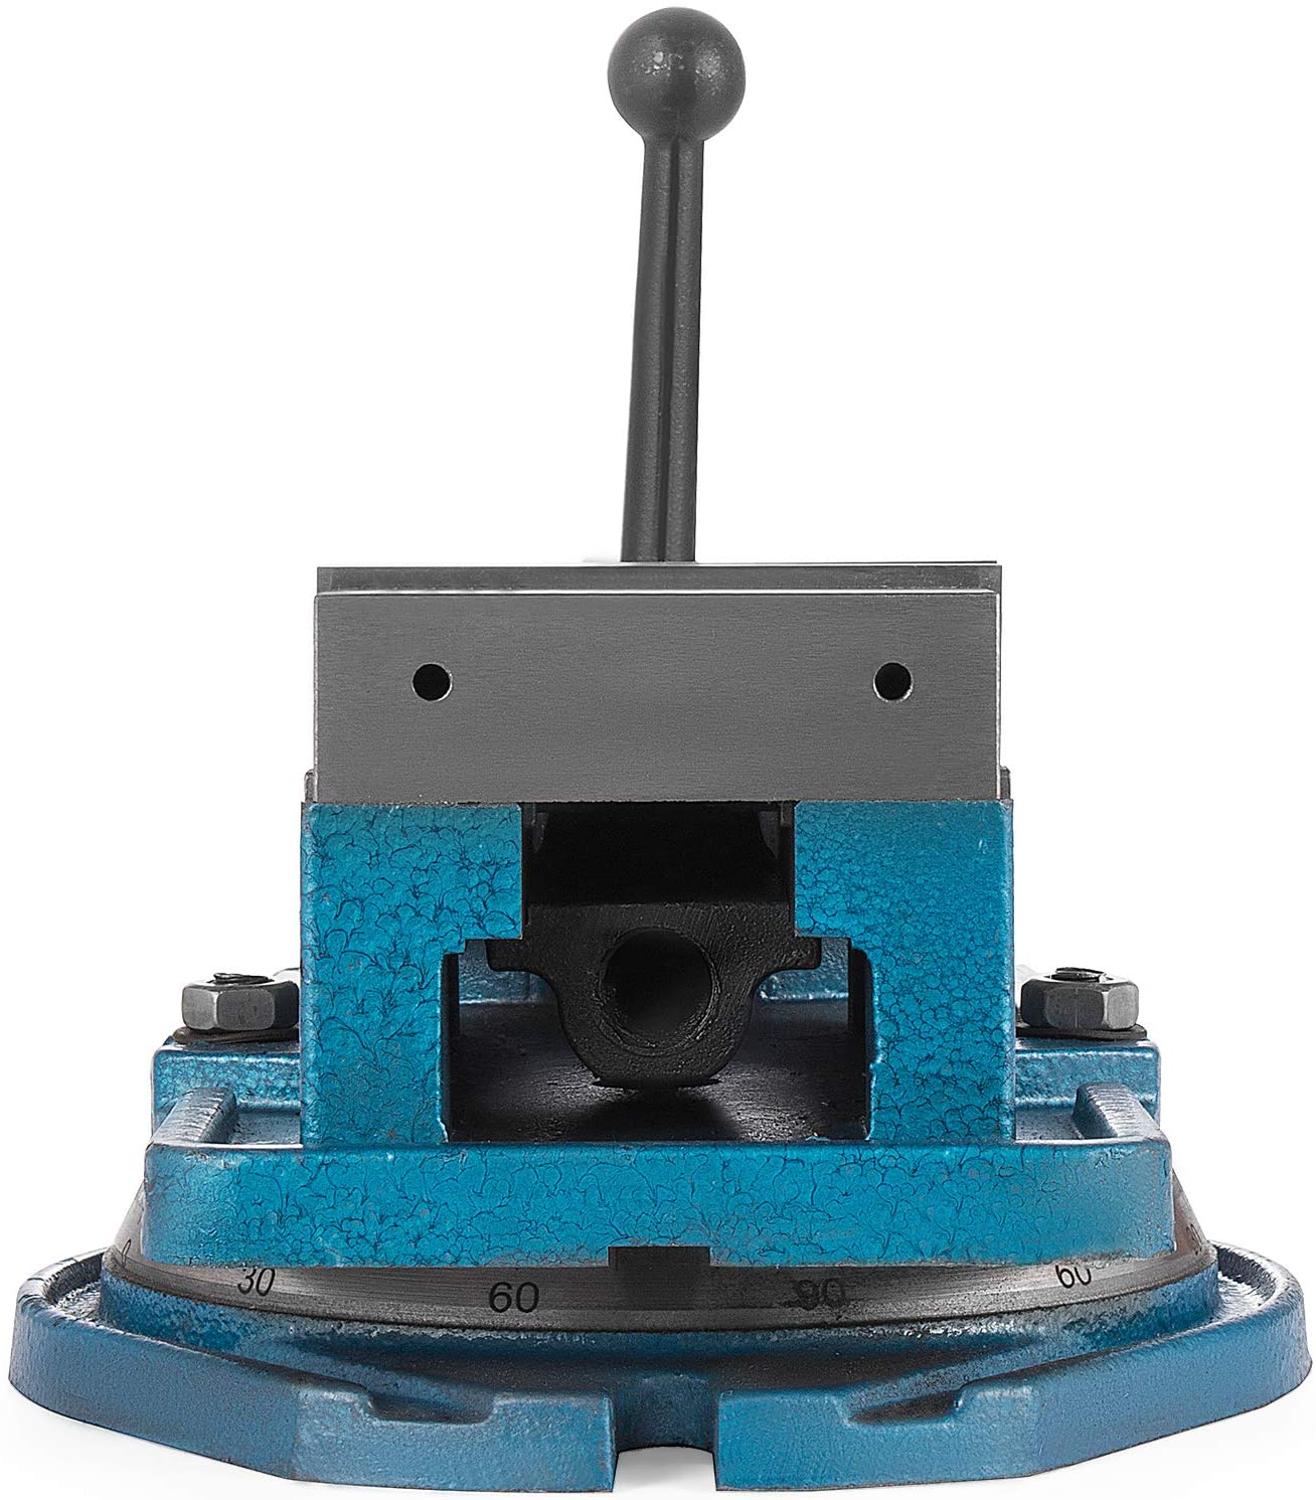 Milling Vise 4 inch jaw width with 360 degree swivel base CNC vice (4 inch)